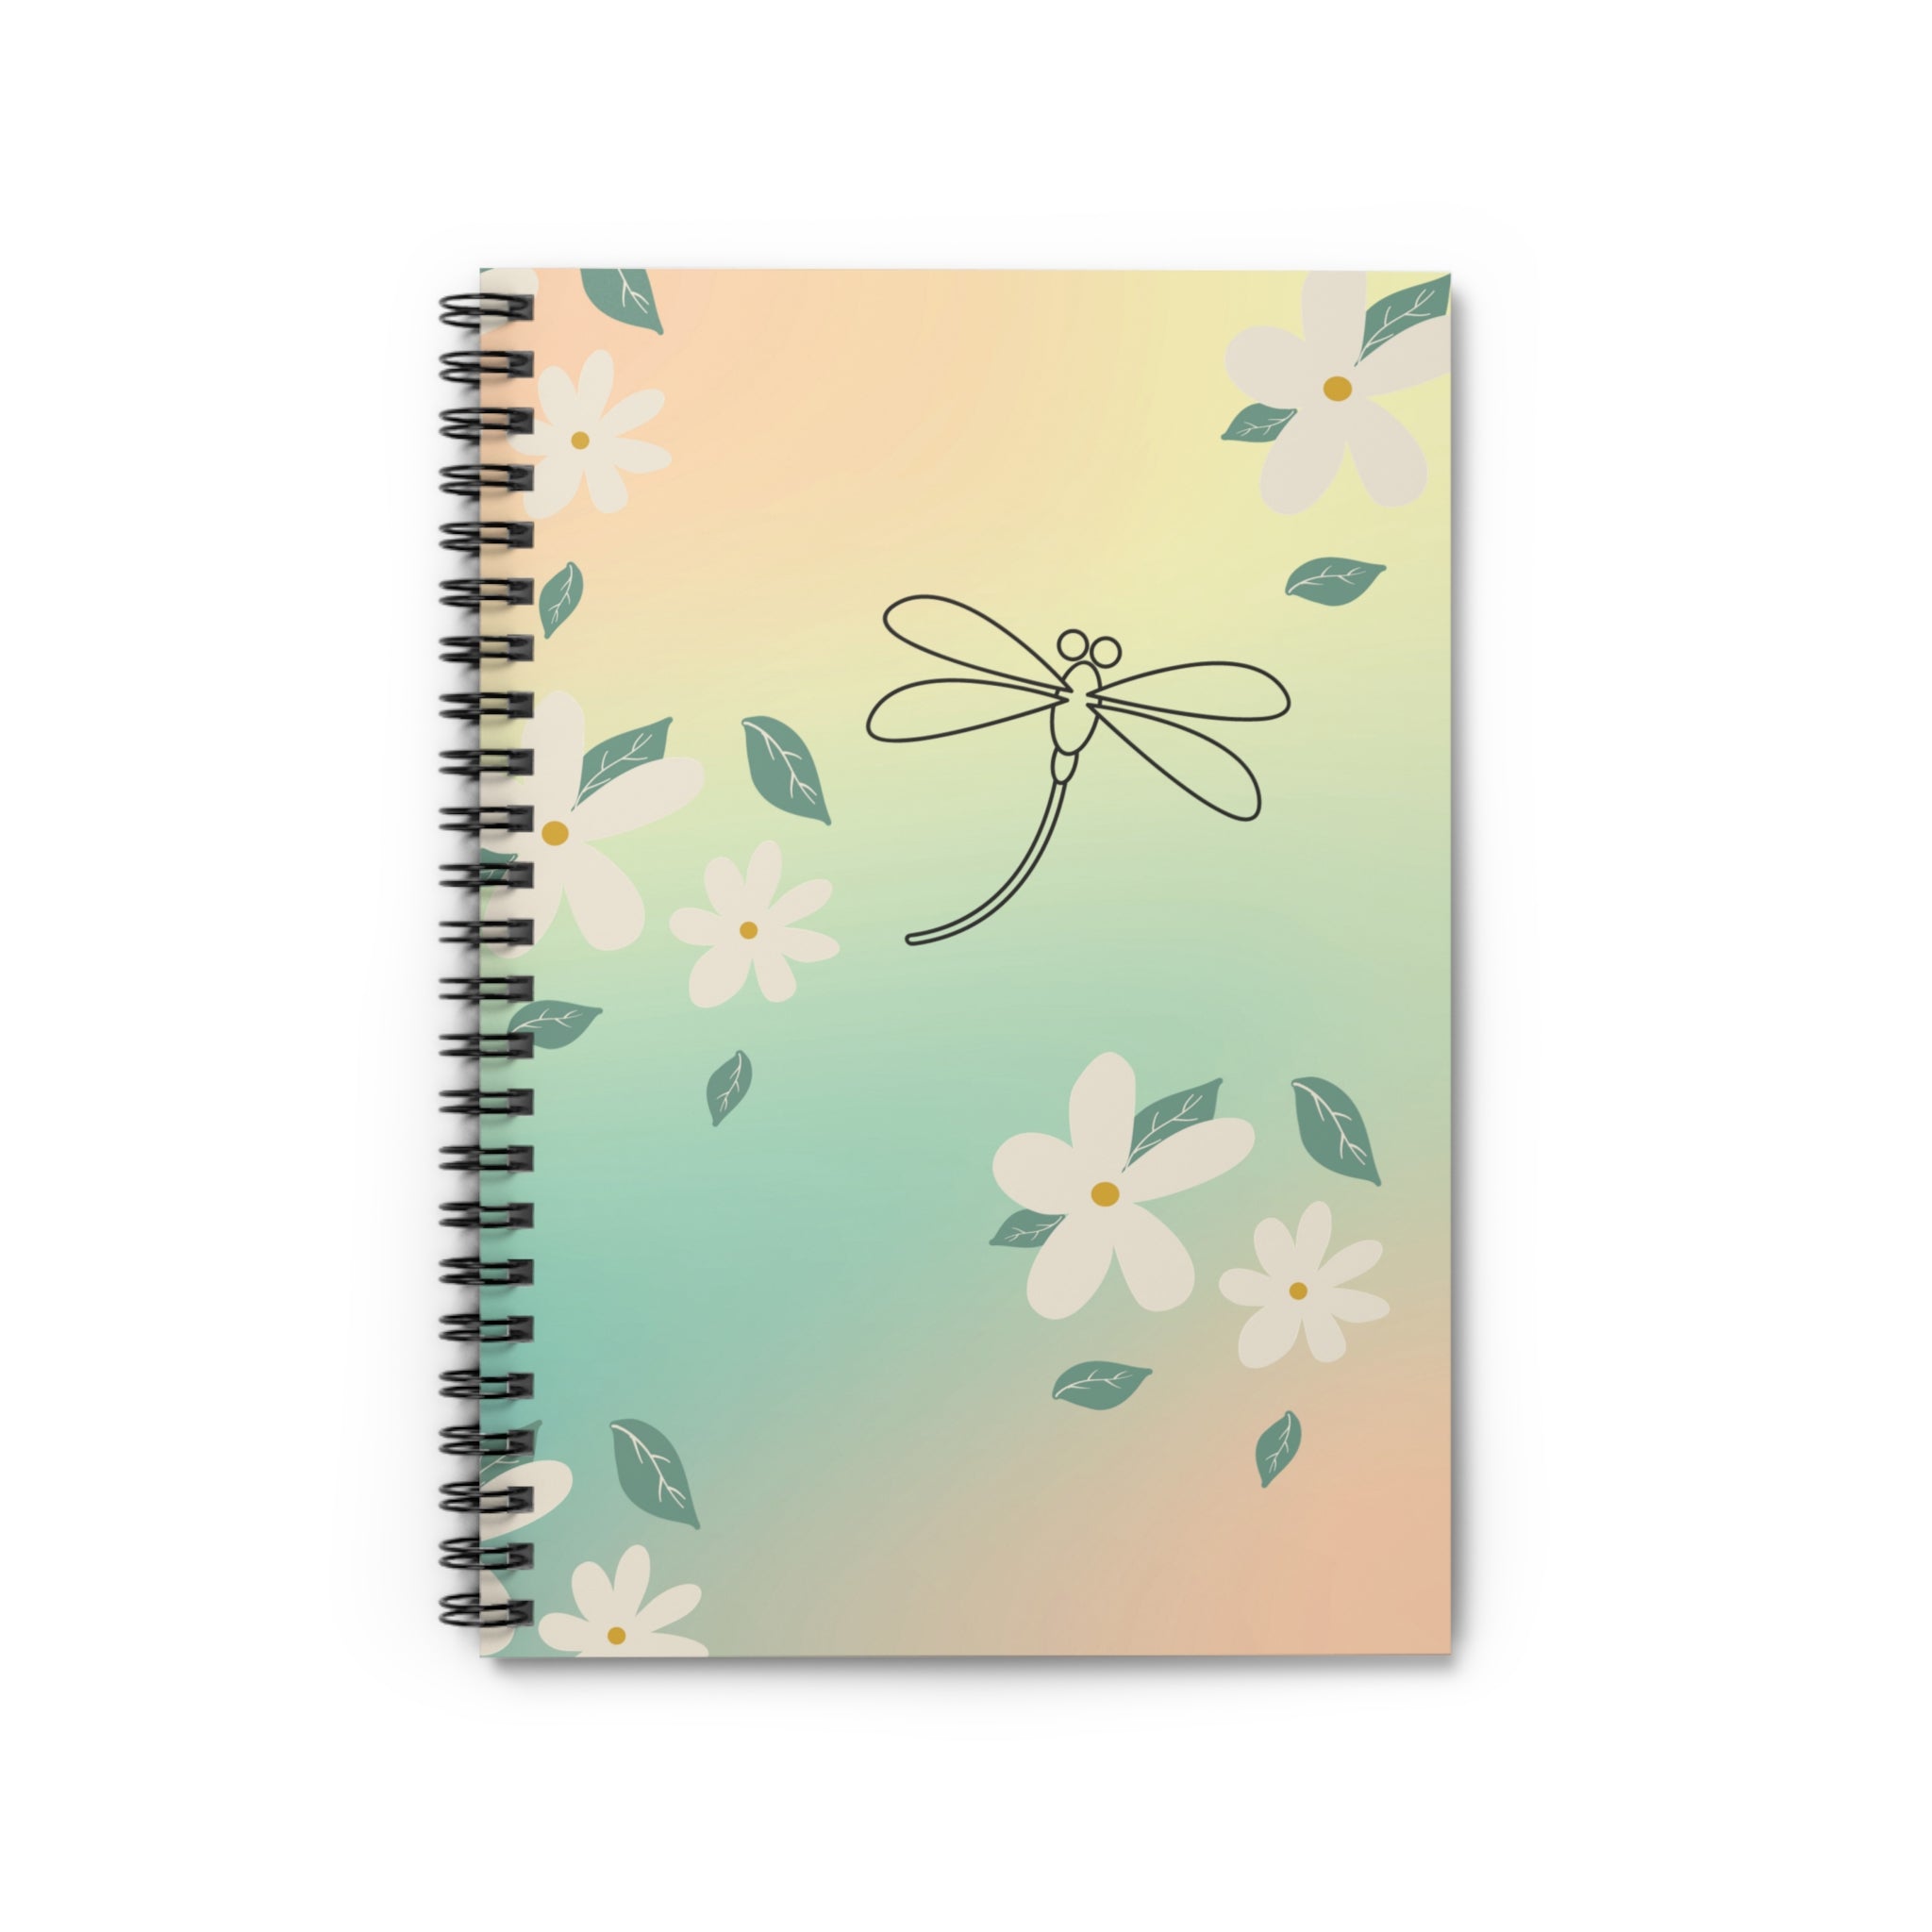 Dragonfly Spiral Notebook - Ruled Line